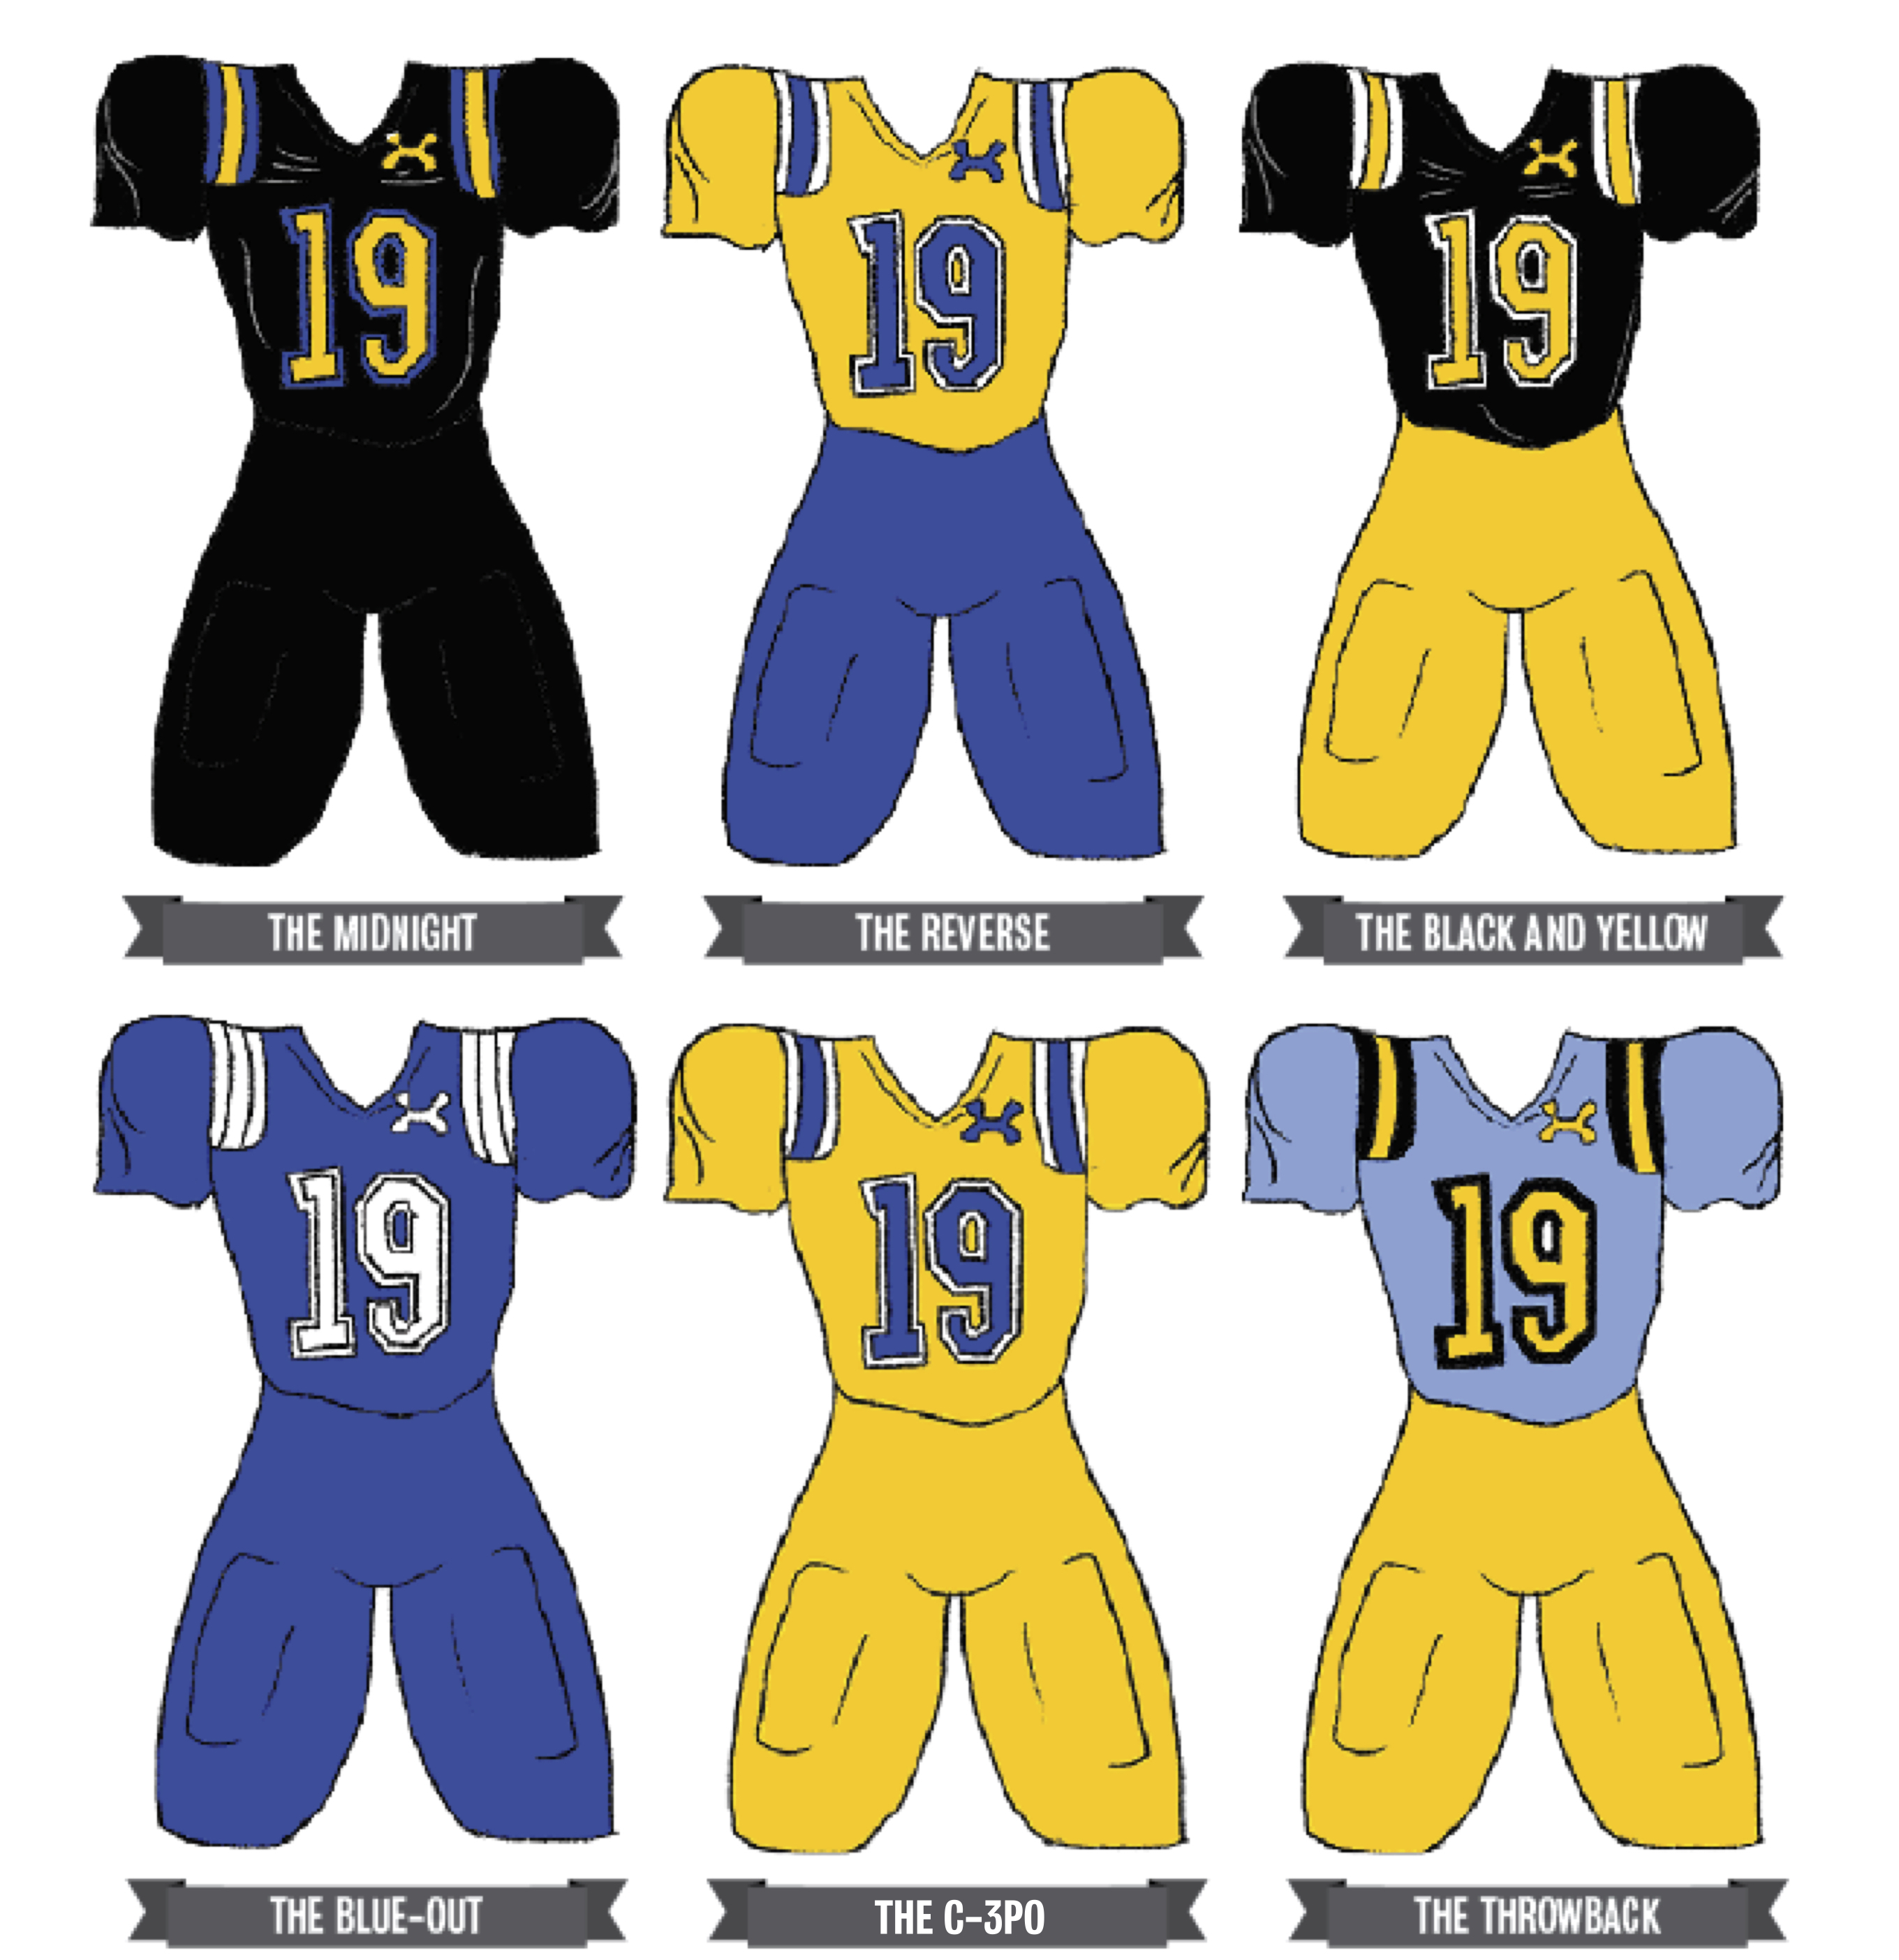 Un-Connon Opinions: Update to football uniforms would help boost